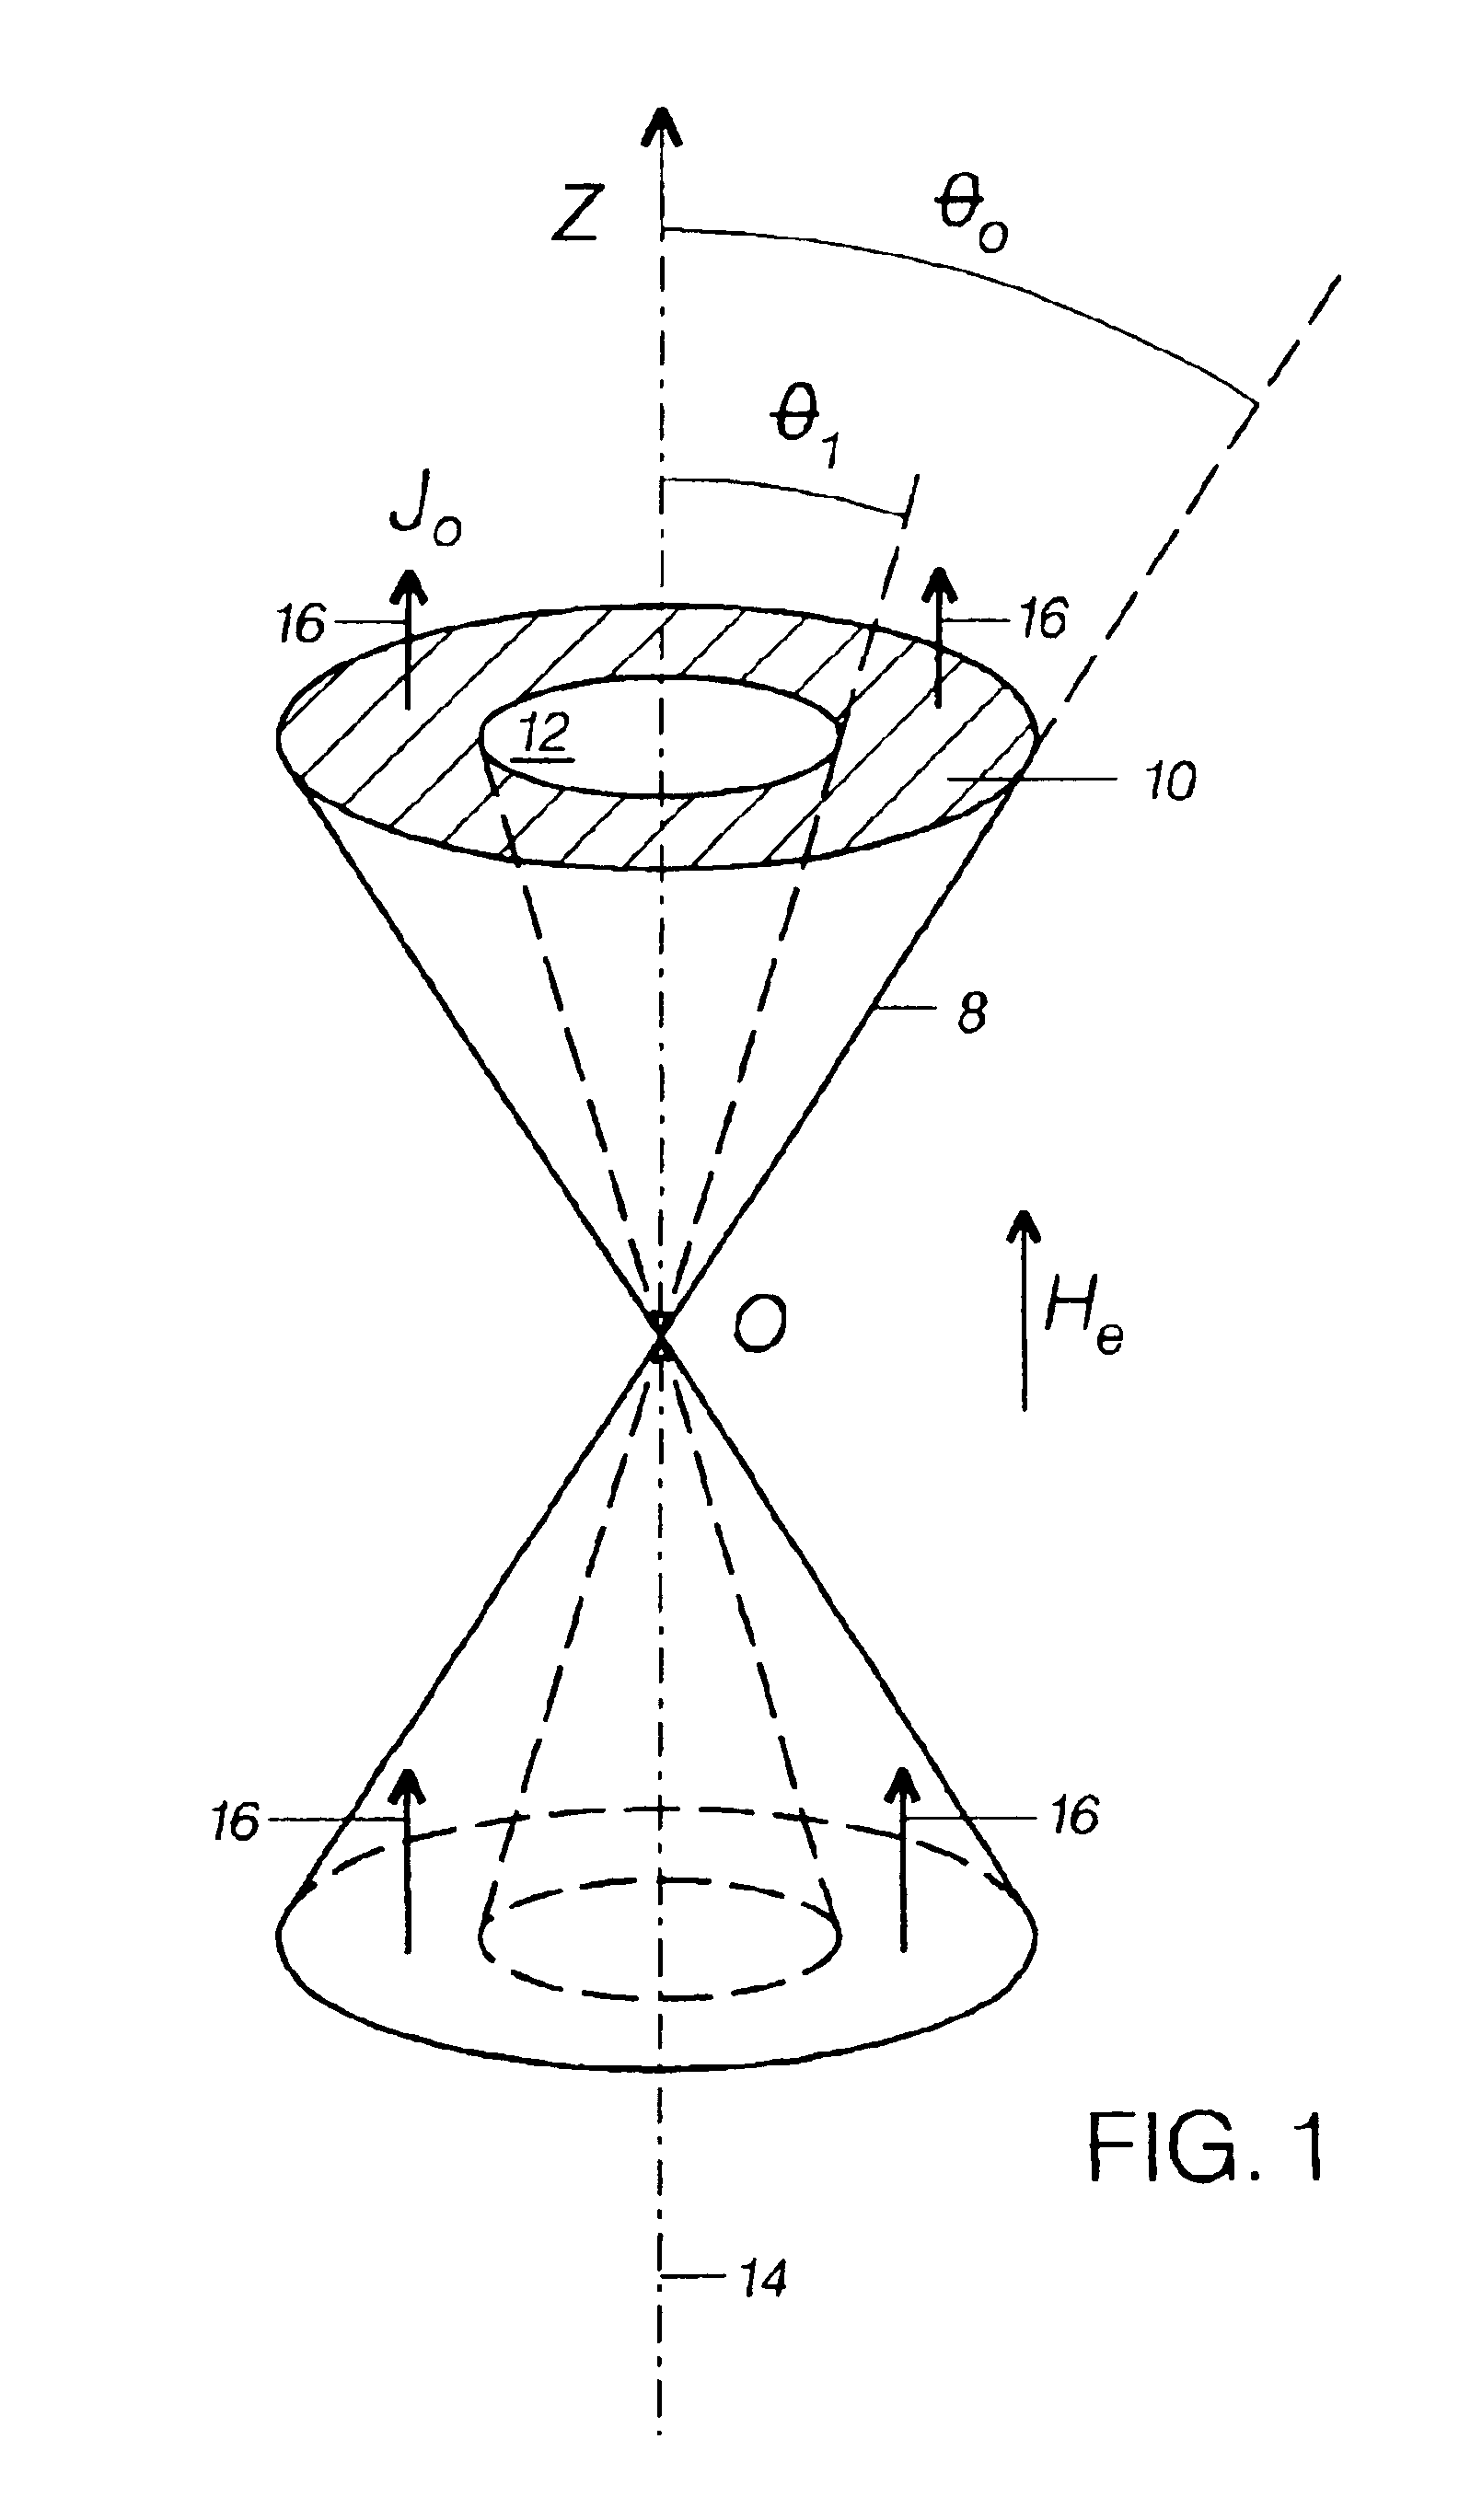 NMR imaging system with conical permanent magnet